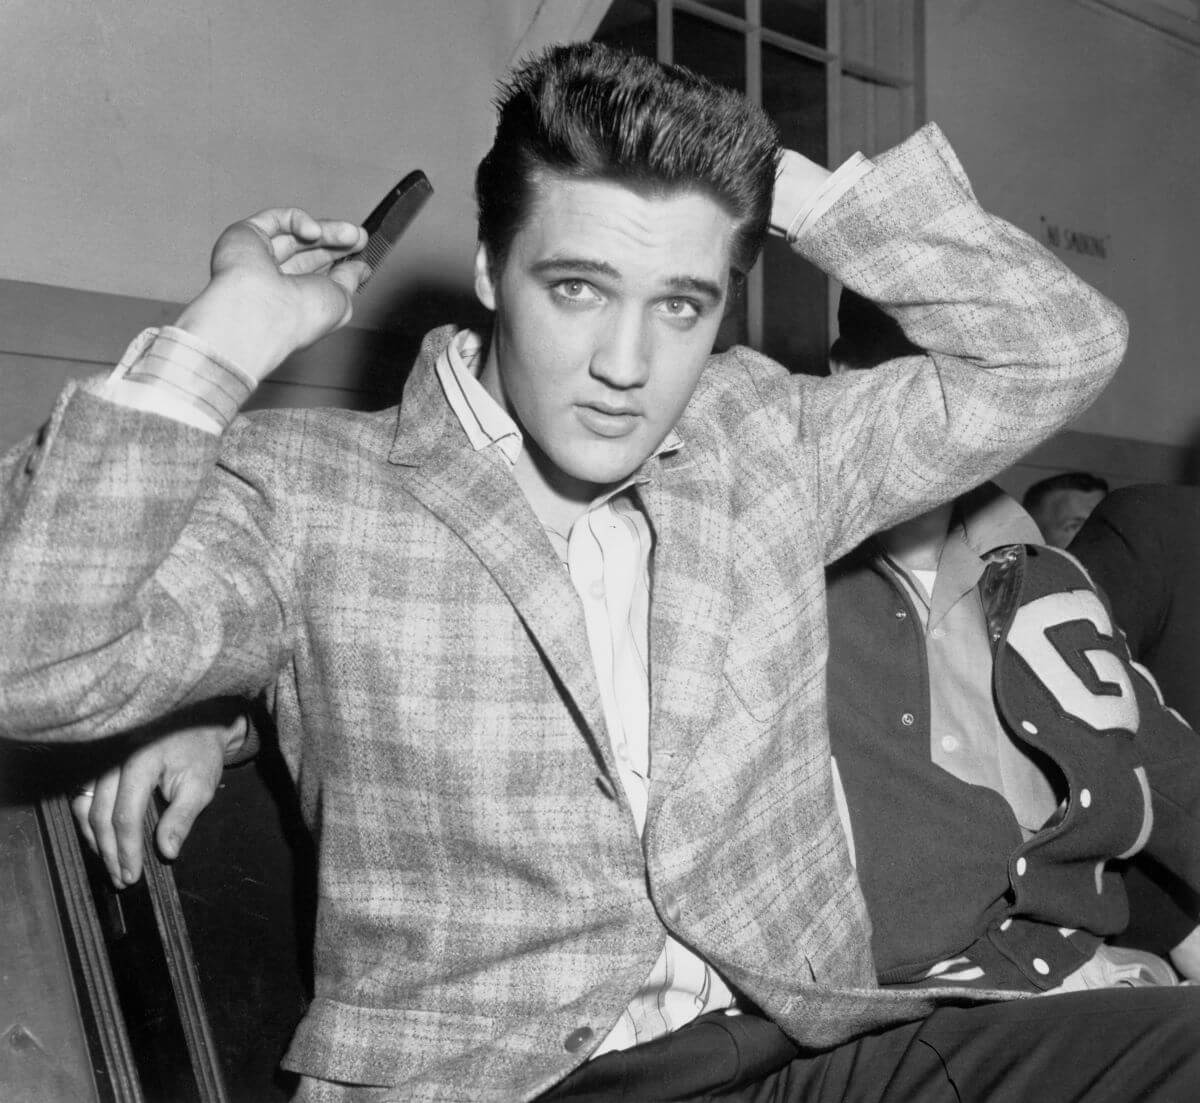 A black and white picture of Elvis Presley wearing a jacket and combing his hair.